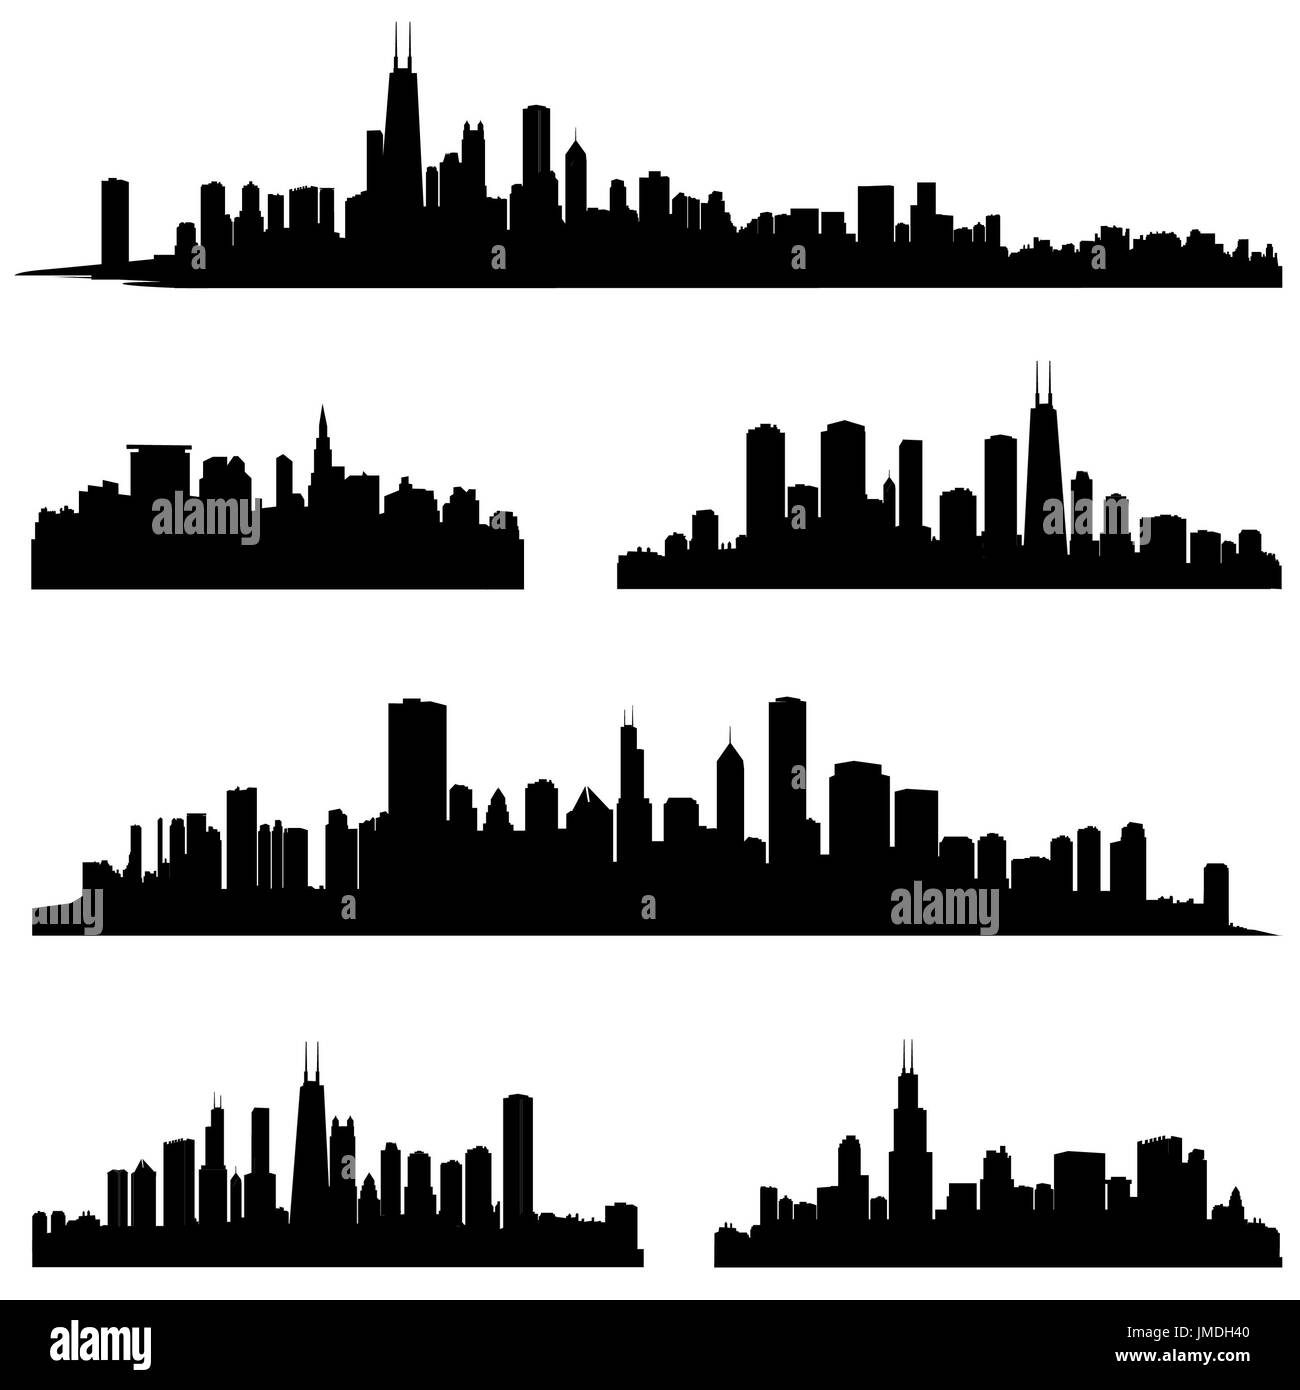 City silhouette vector set. Panorama city background. Skyline urban border collection. Stock Photo